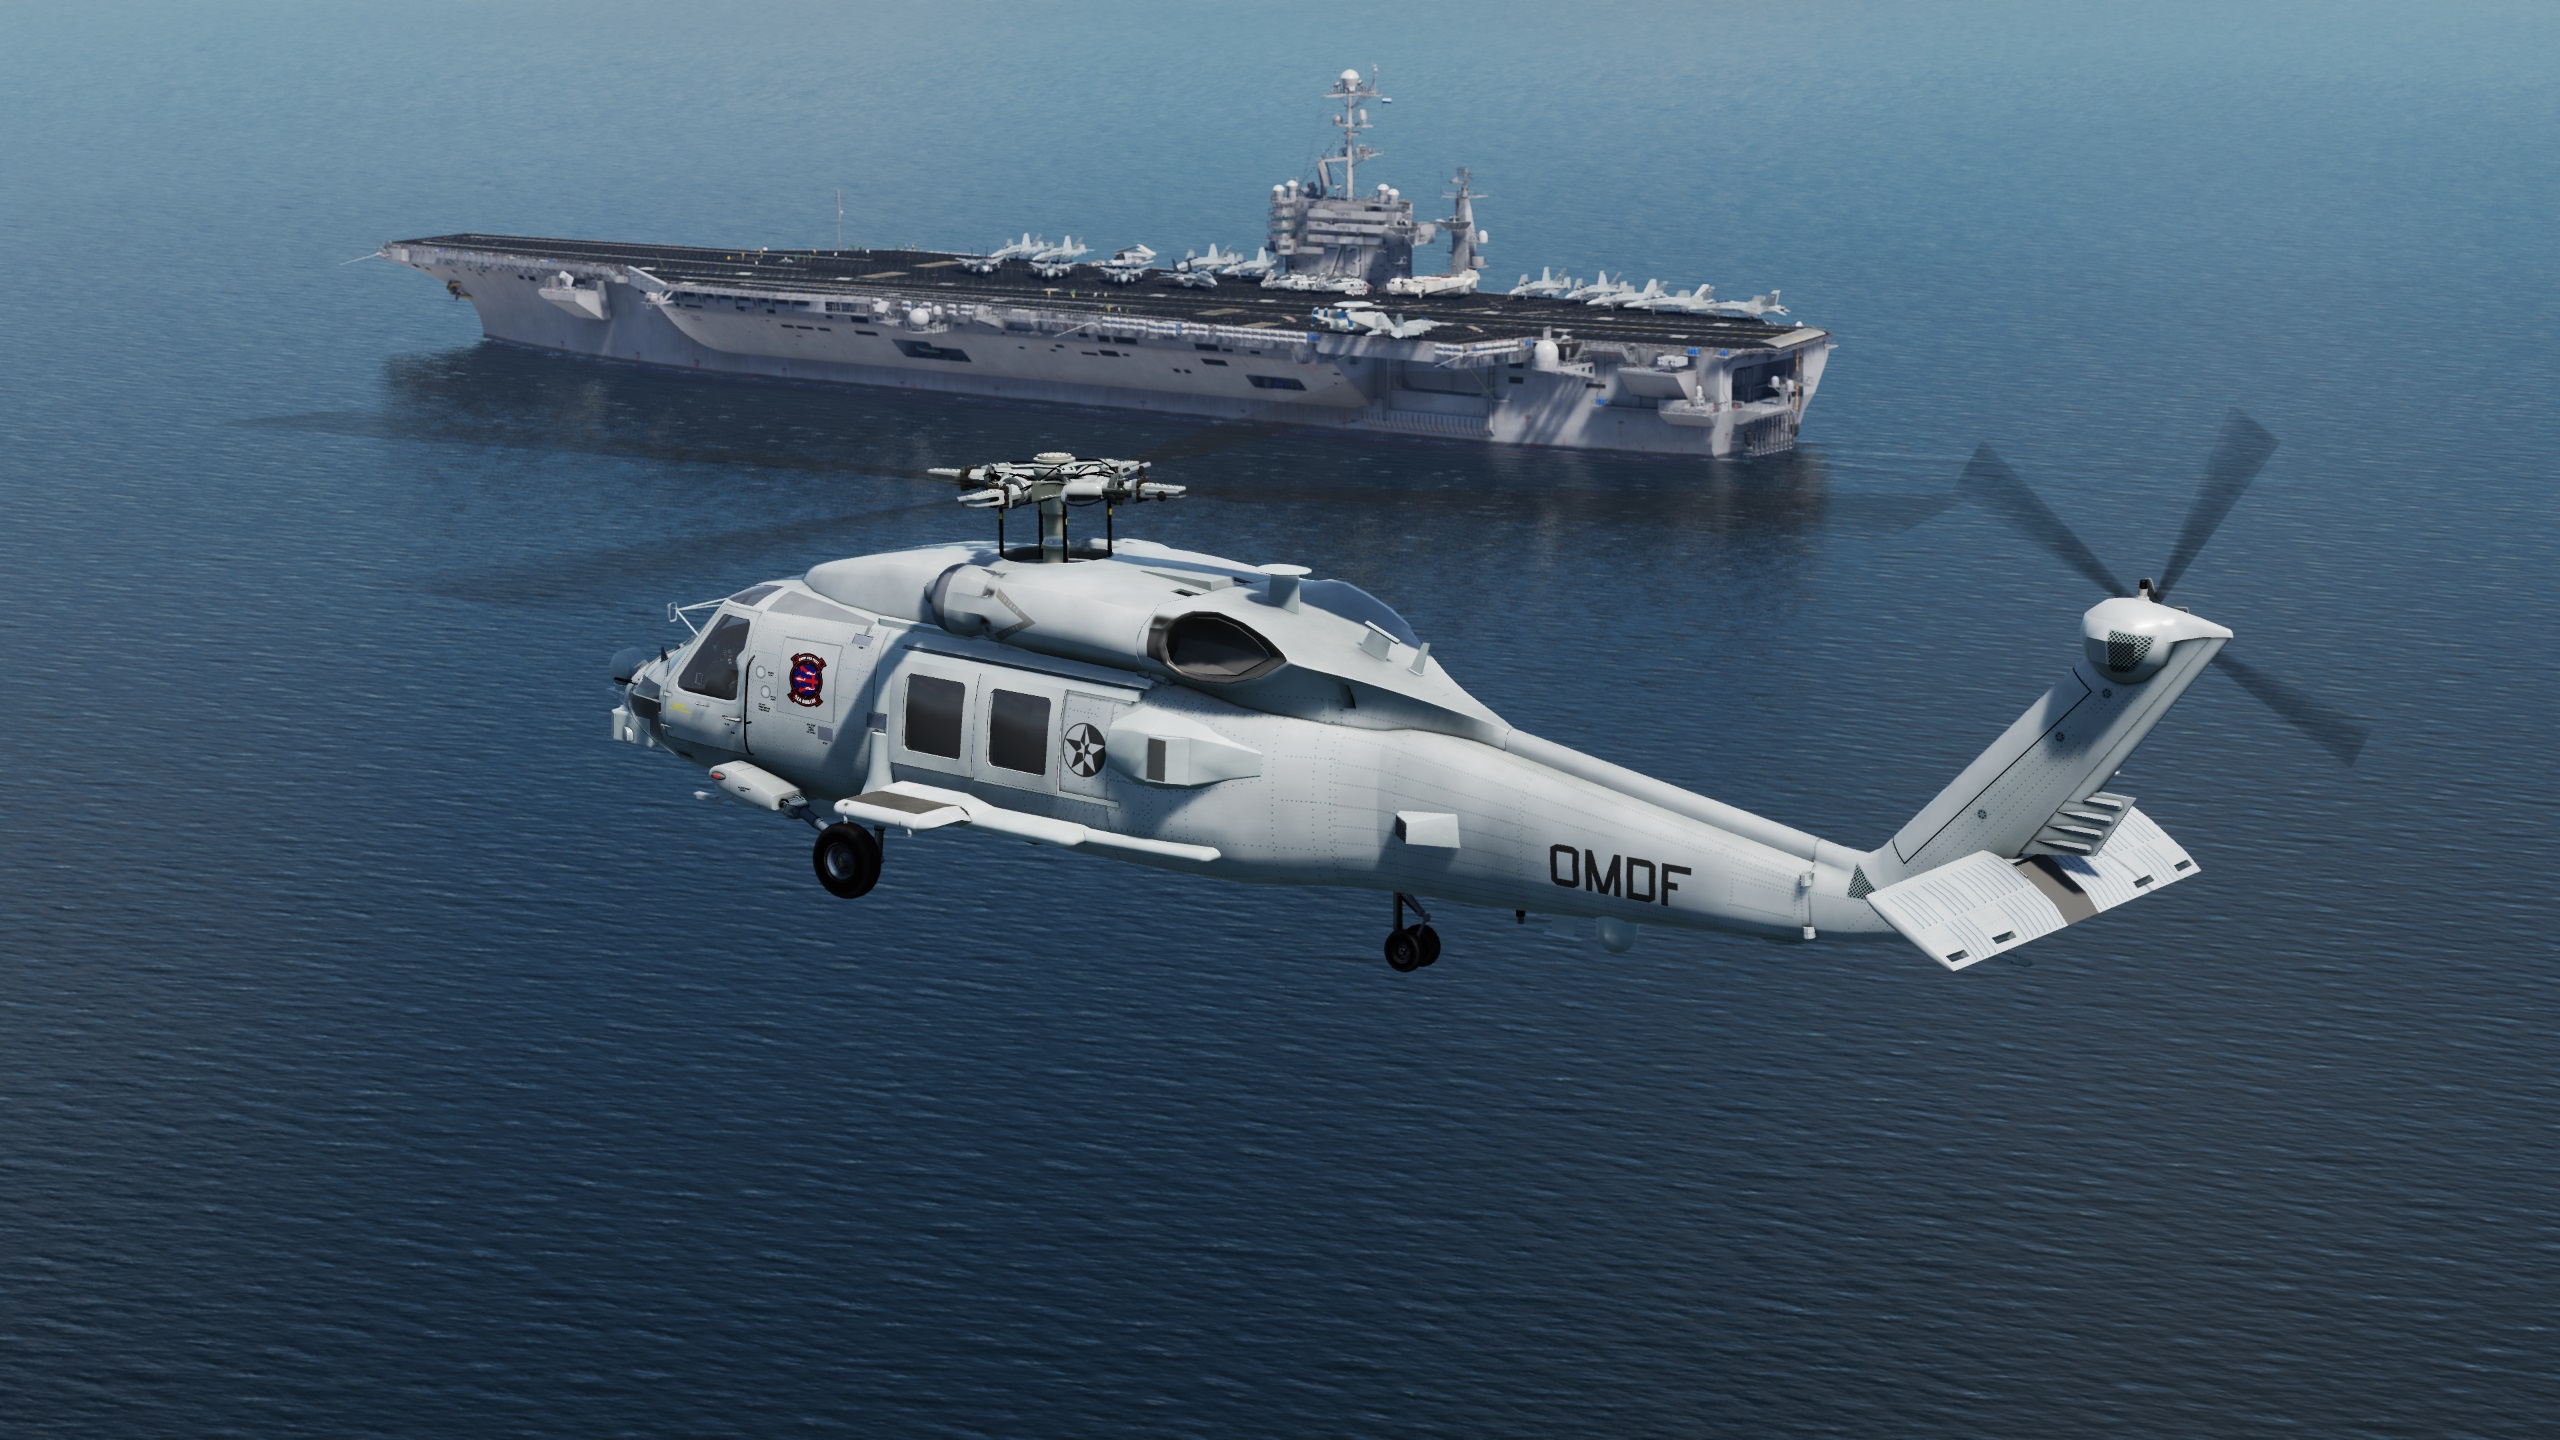 Ace Combat - Osean Maritime Defense Force "Sea Goblin" livery for rato65's HH-60 / MH-60 Seahawk Mod